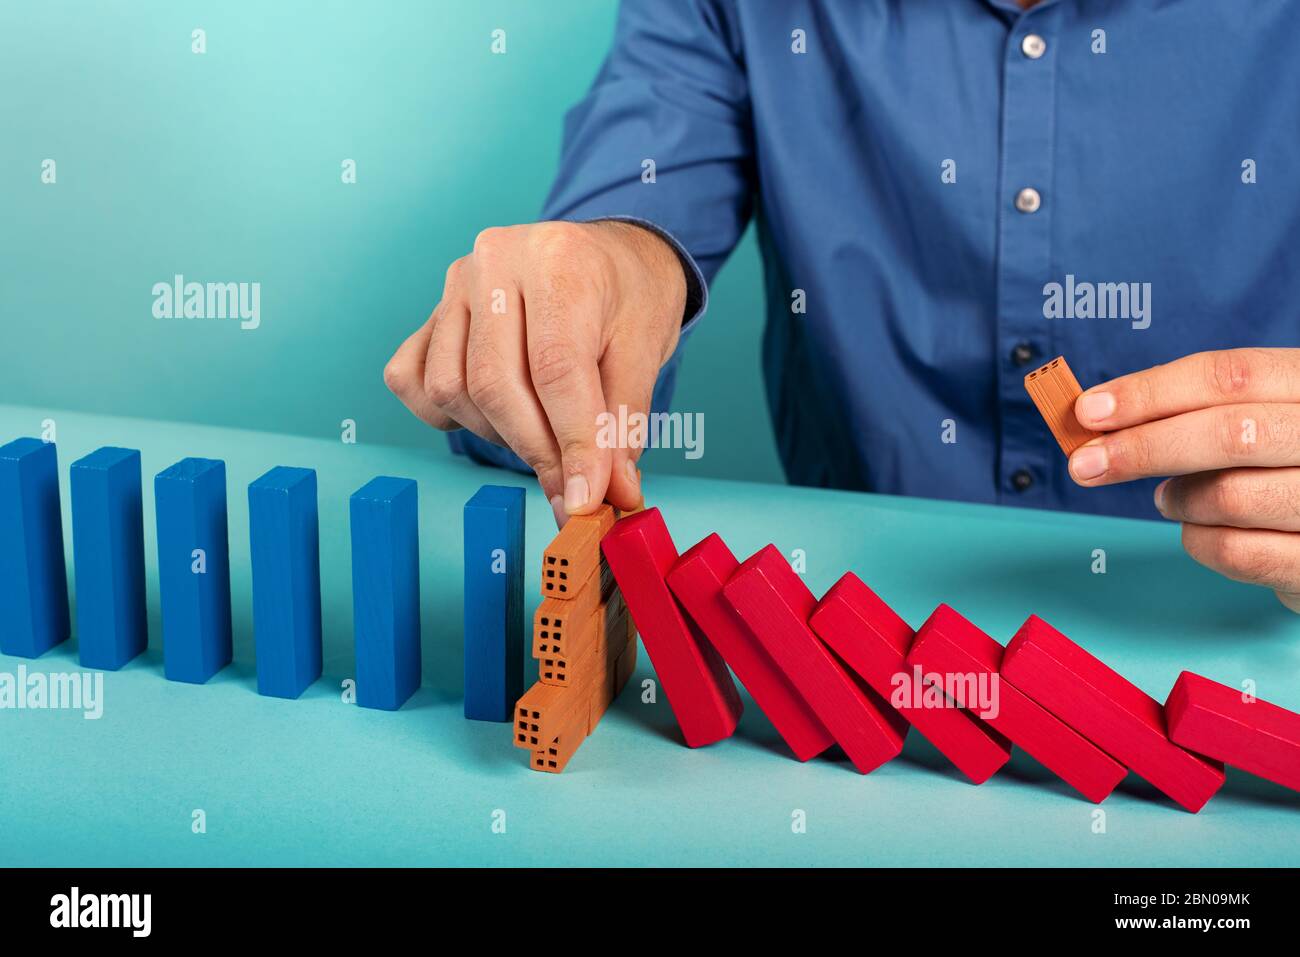 Businessman stops a chain fall like domino game. Concept of preventing crisis and failure in business. Stock Photo